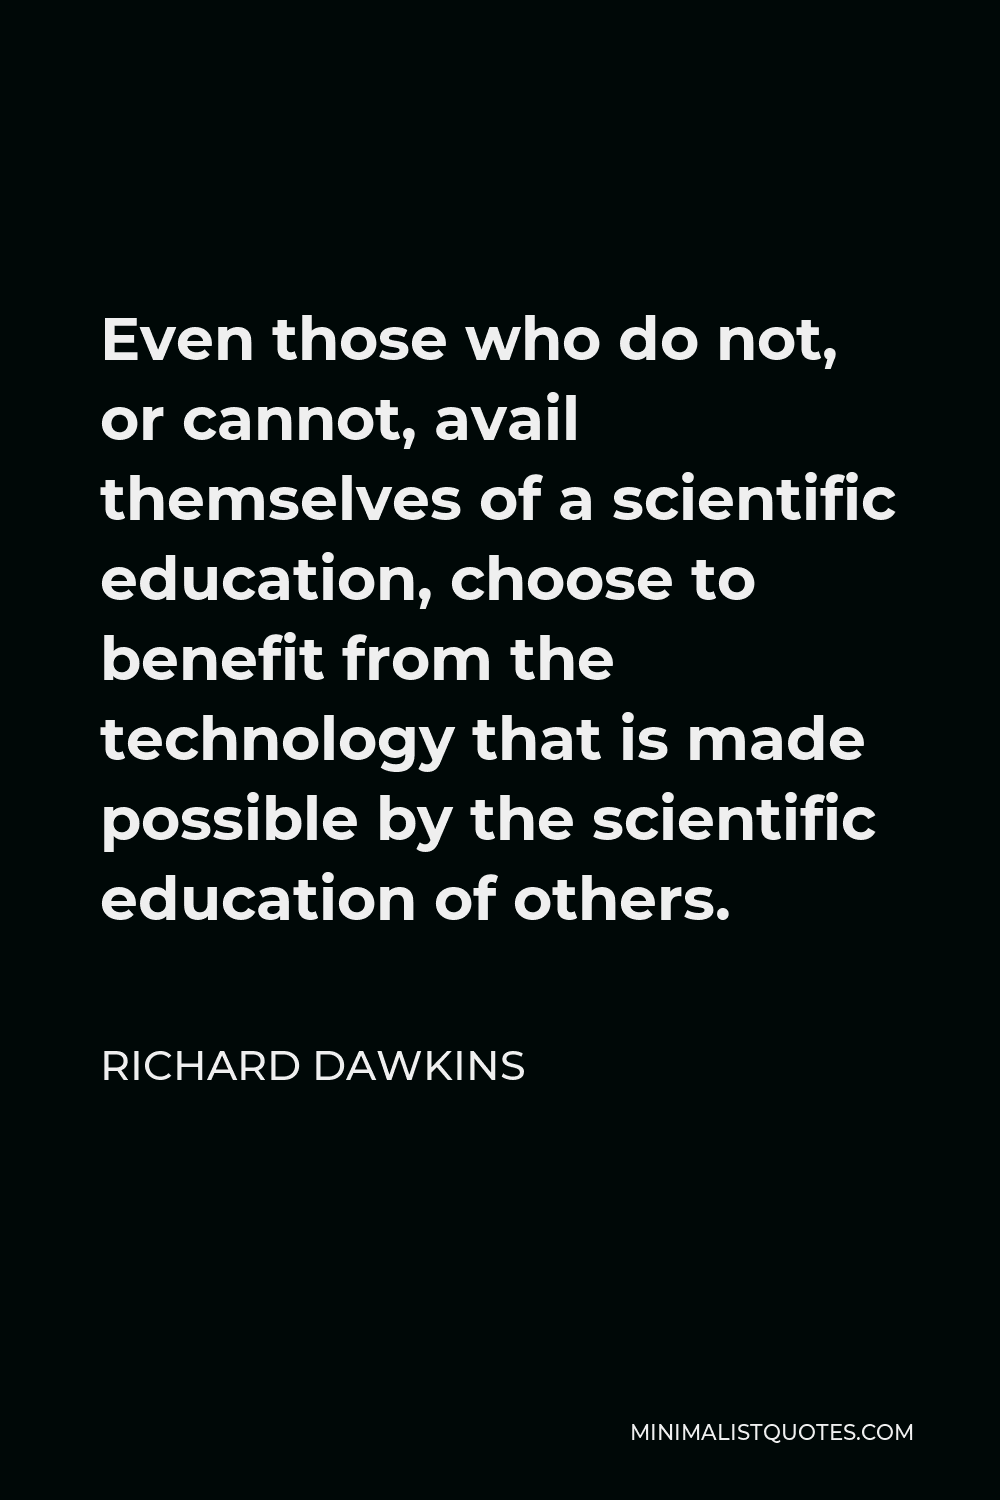 Richard Dawkins Quote - Even those who do not, or cannot, avail themselves of a scientific education, choose to benefit from the technology that is made possible by the scientific education of others.